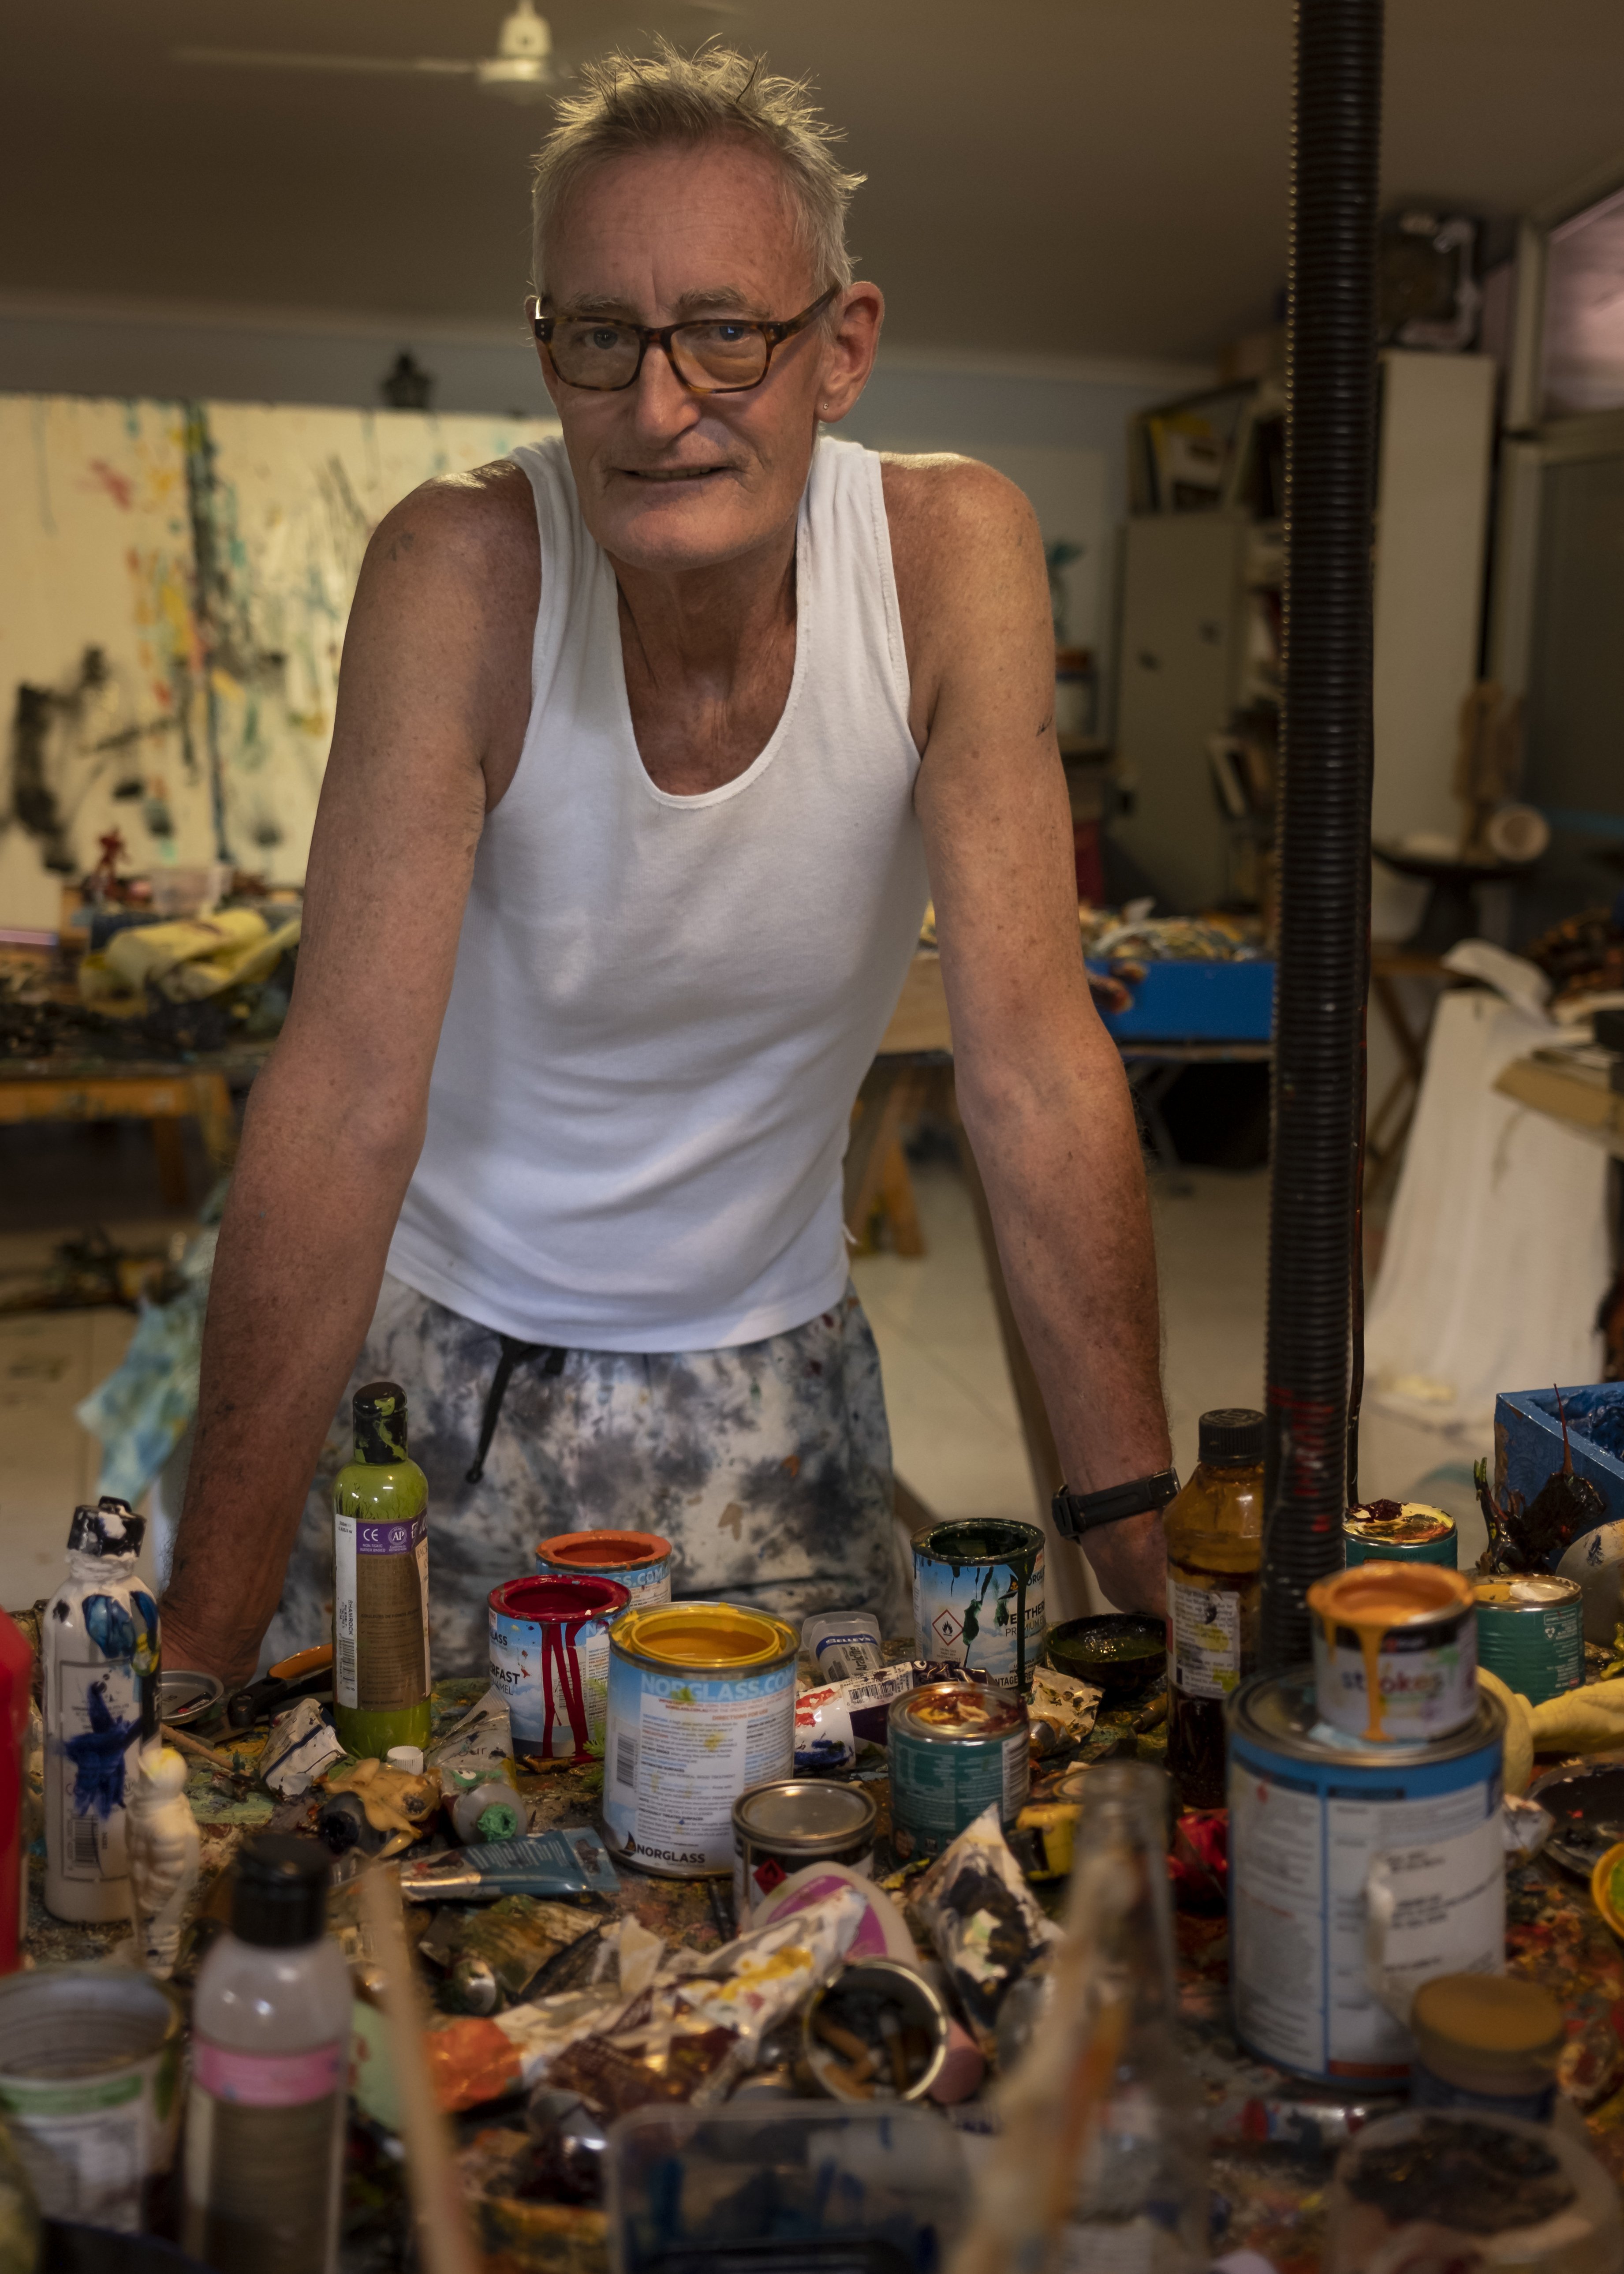 Artist Geoff Dixon is the subject of a new documentary.